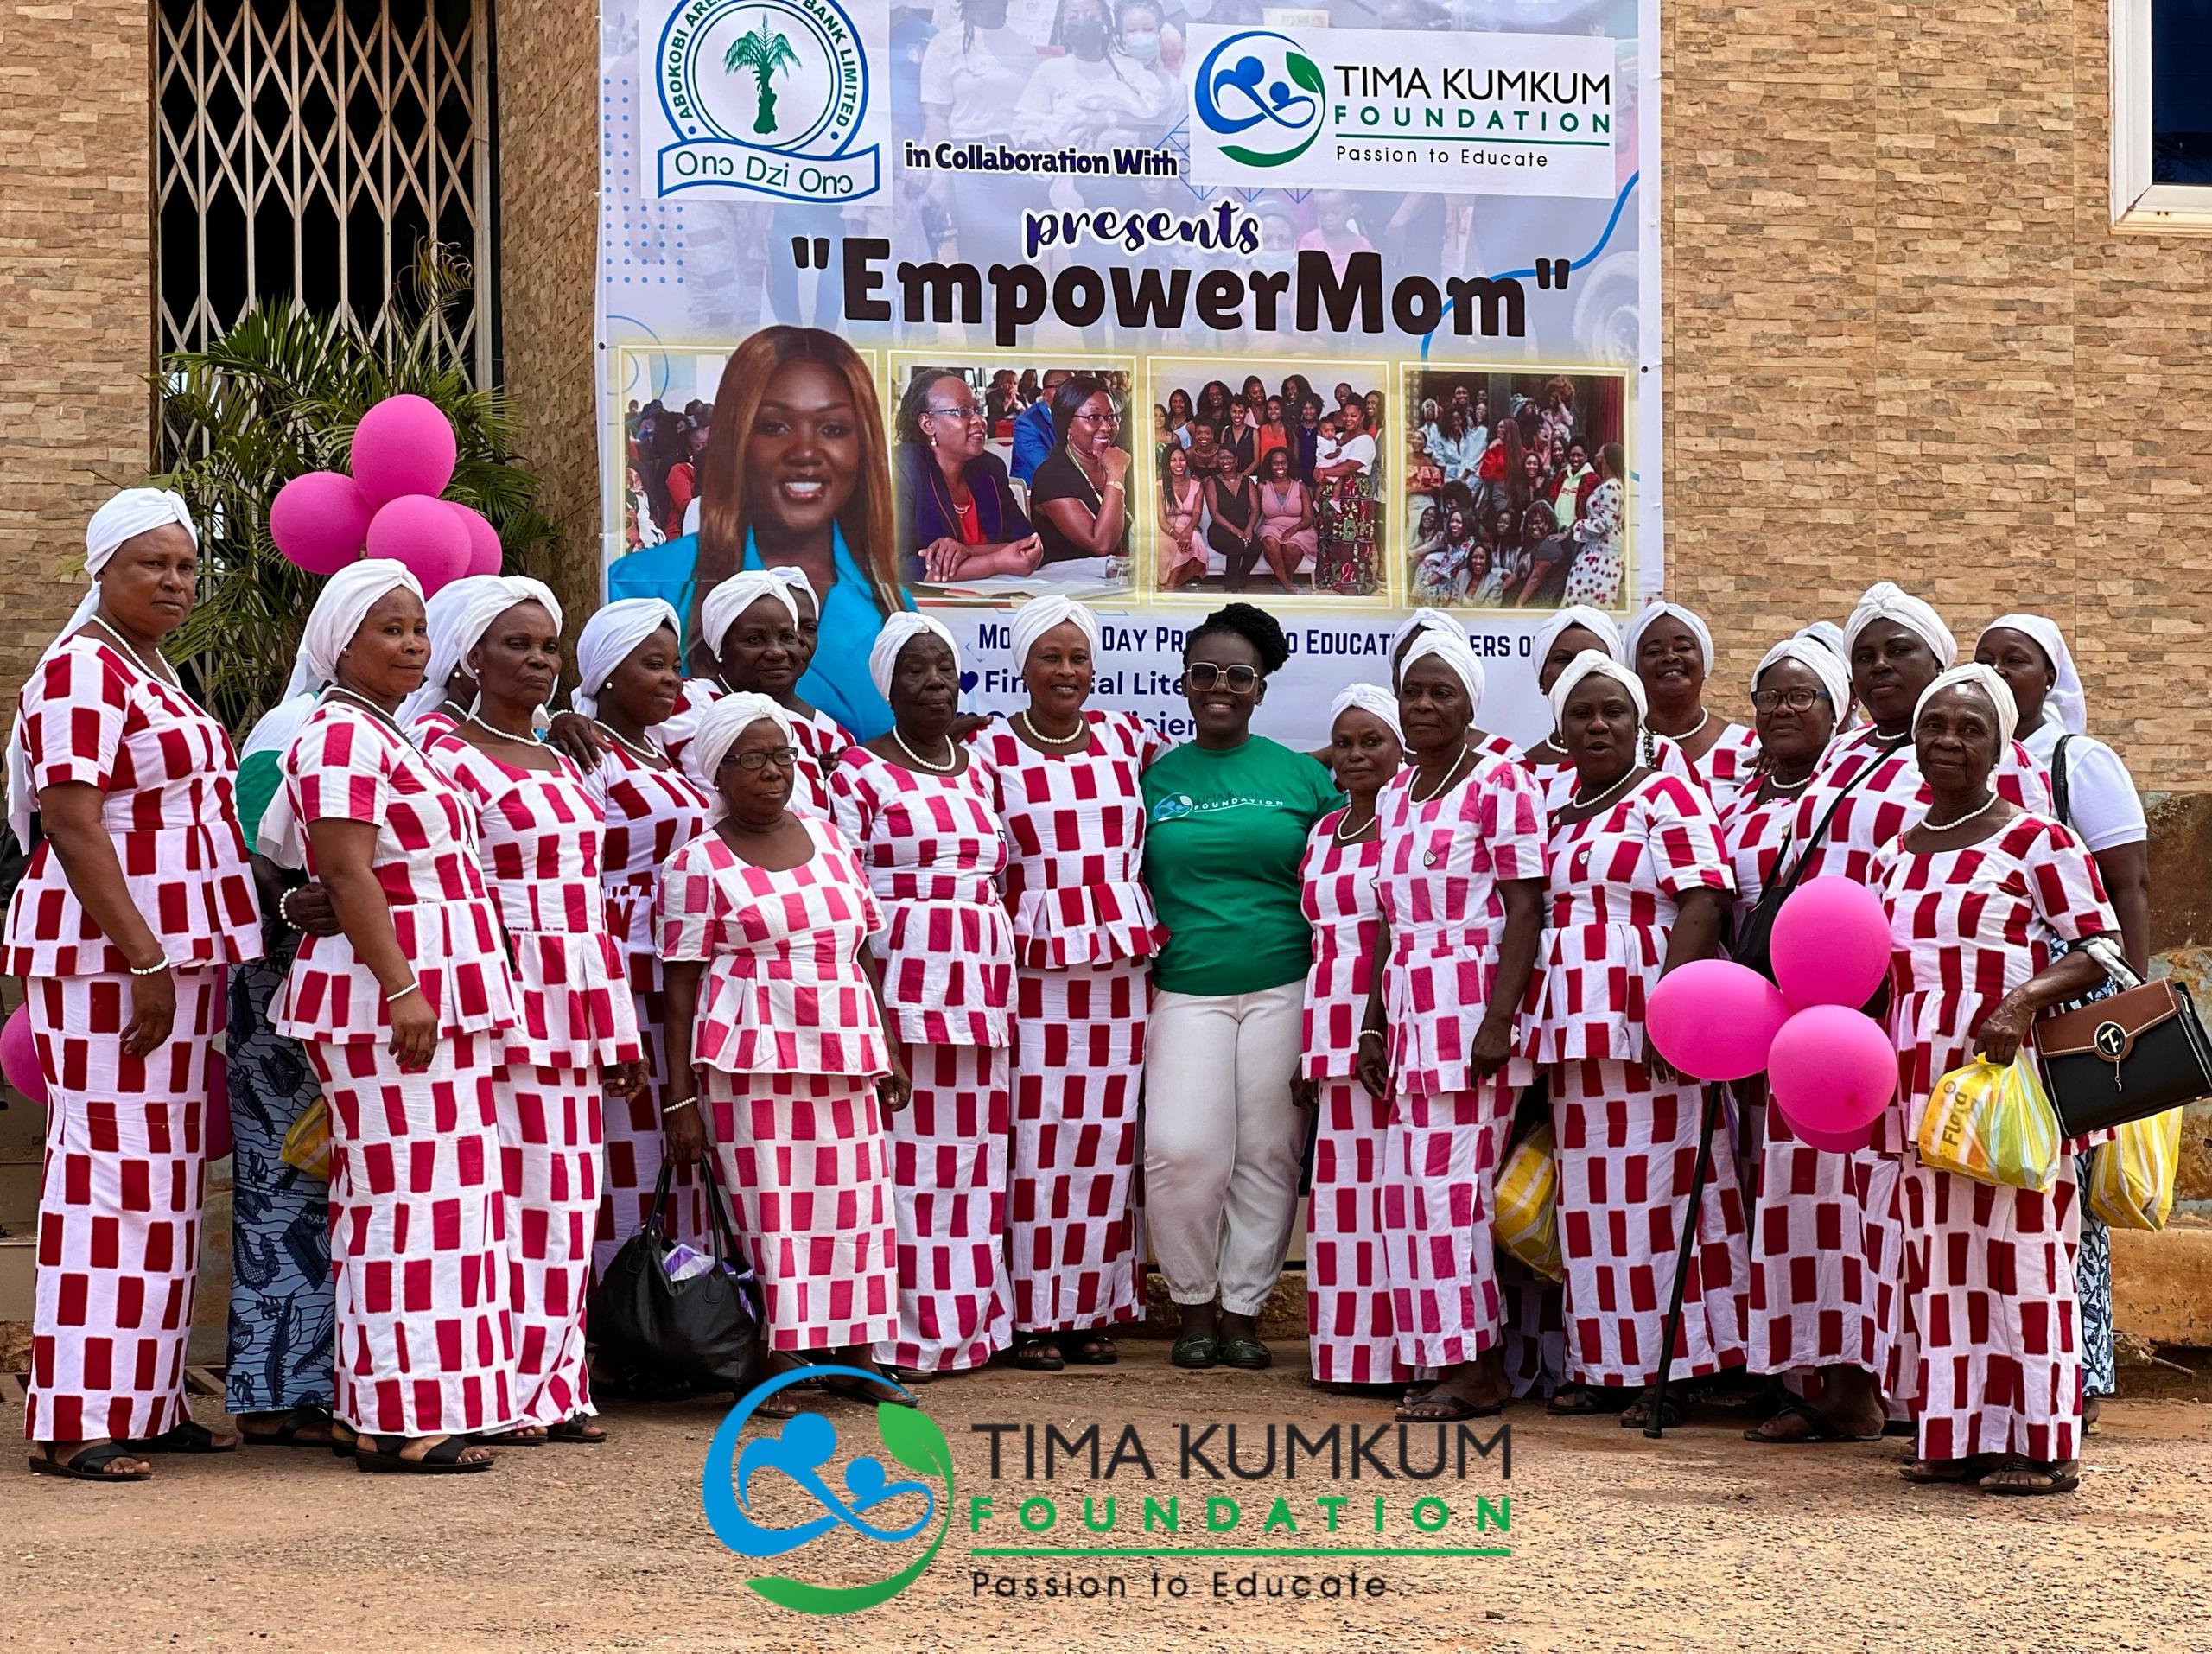 Tima Kumkum Foundation hosts ‘EmpowerMom’ event in celebration of Mother’s Day [Video]